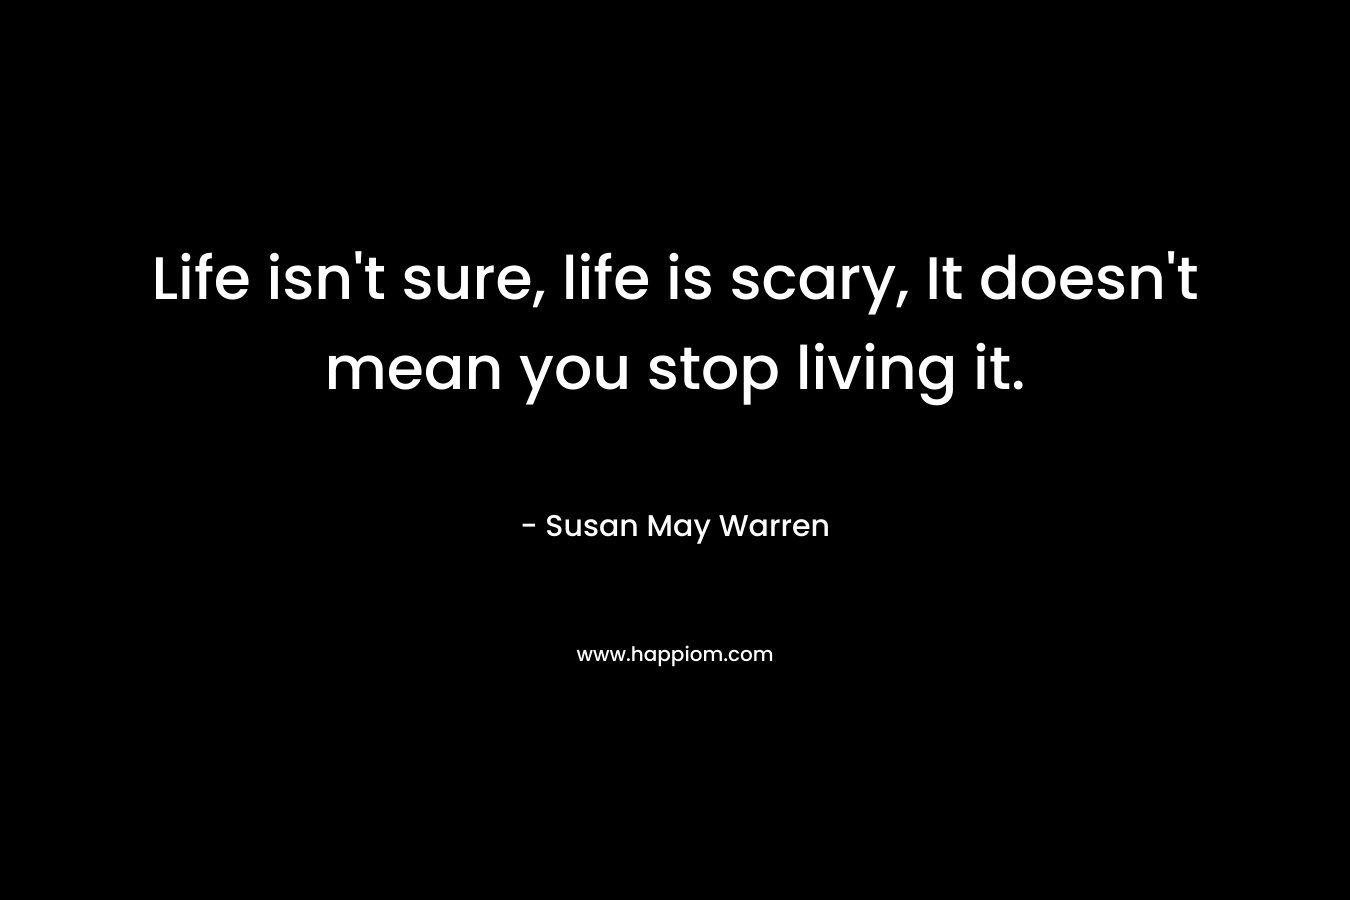 Life isn't sure, life is scary, It doesn't mean you stop living it.